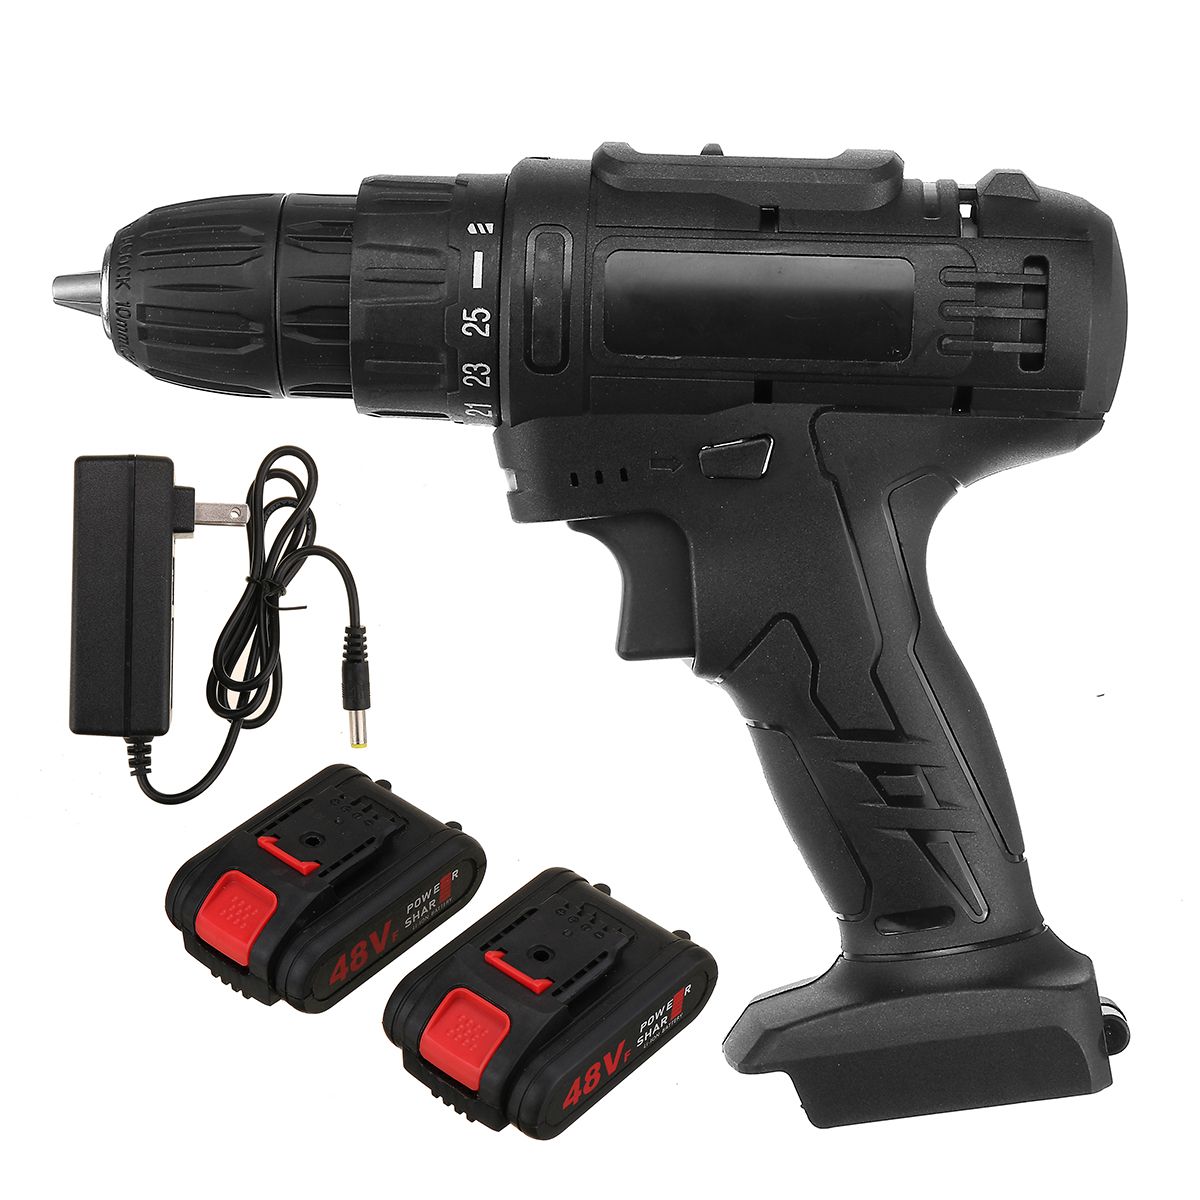 Cordless-Impact-Wrench-Drill-Socket-25-Speeds-LED-Electric-Screwdrive-w-12-Batteries-1712153